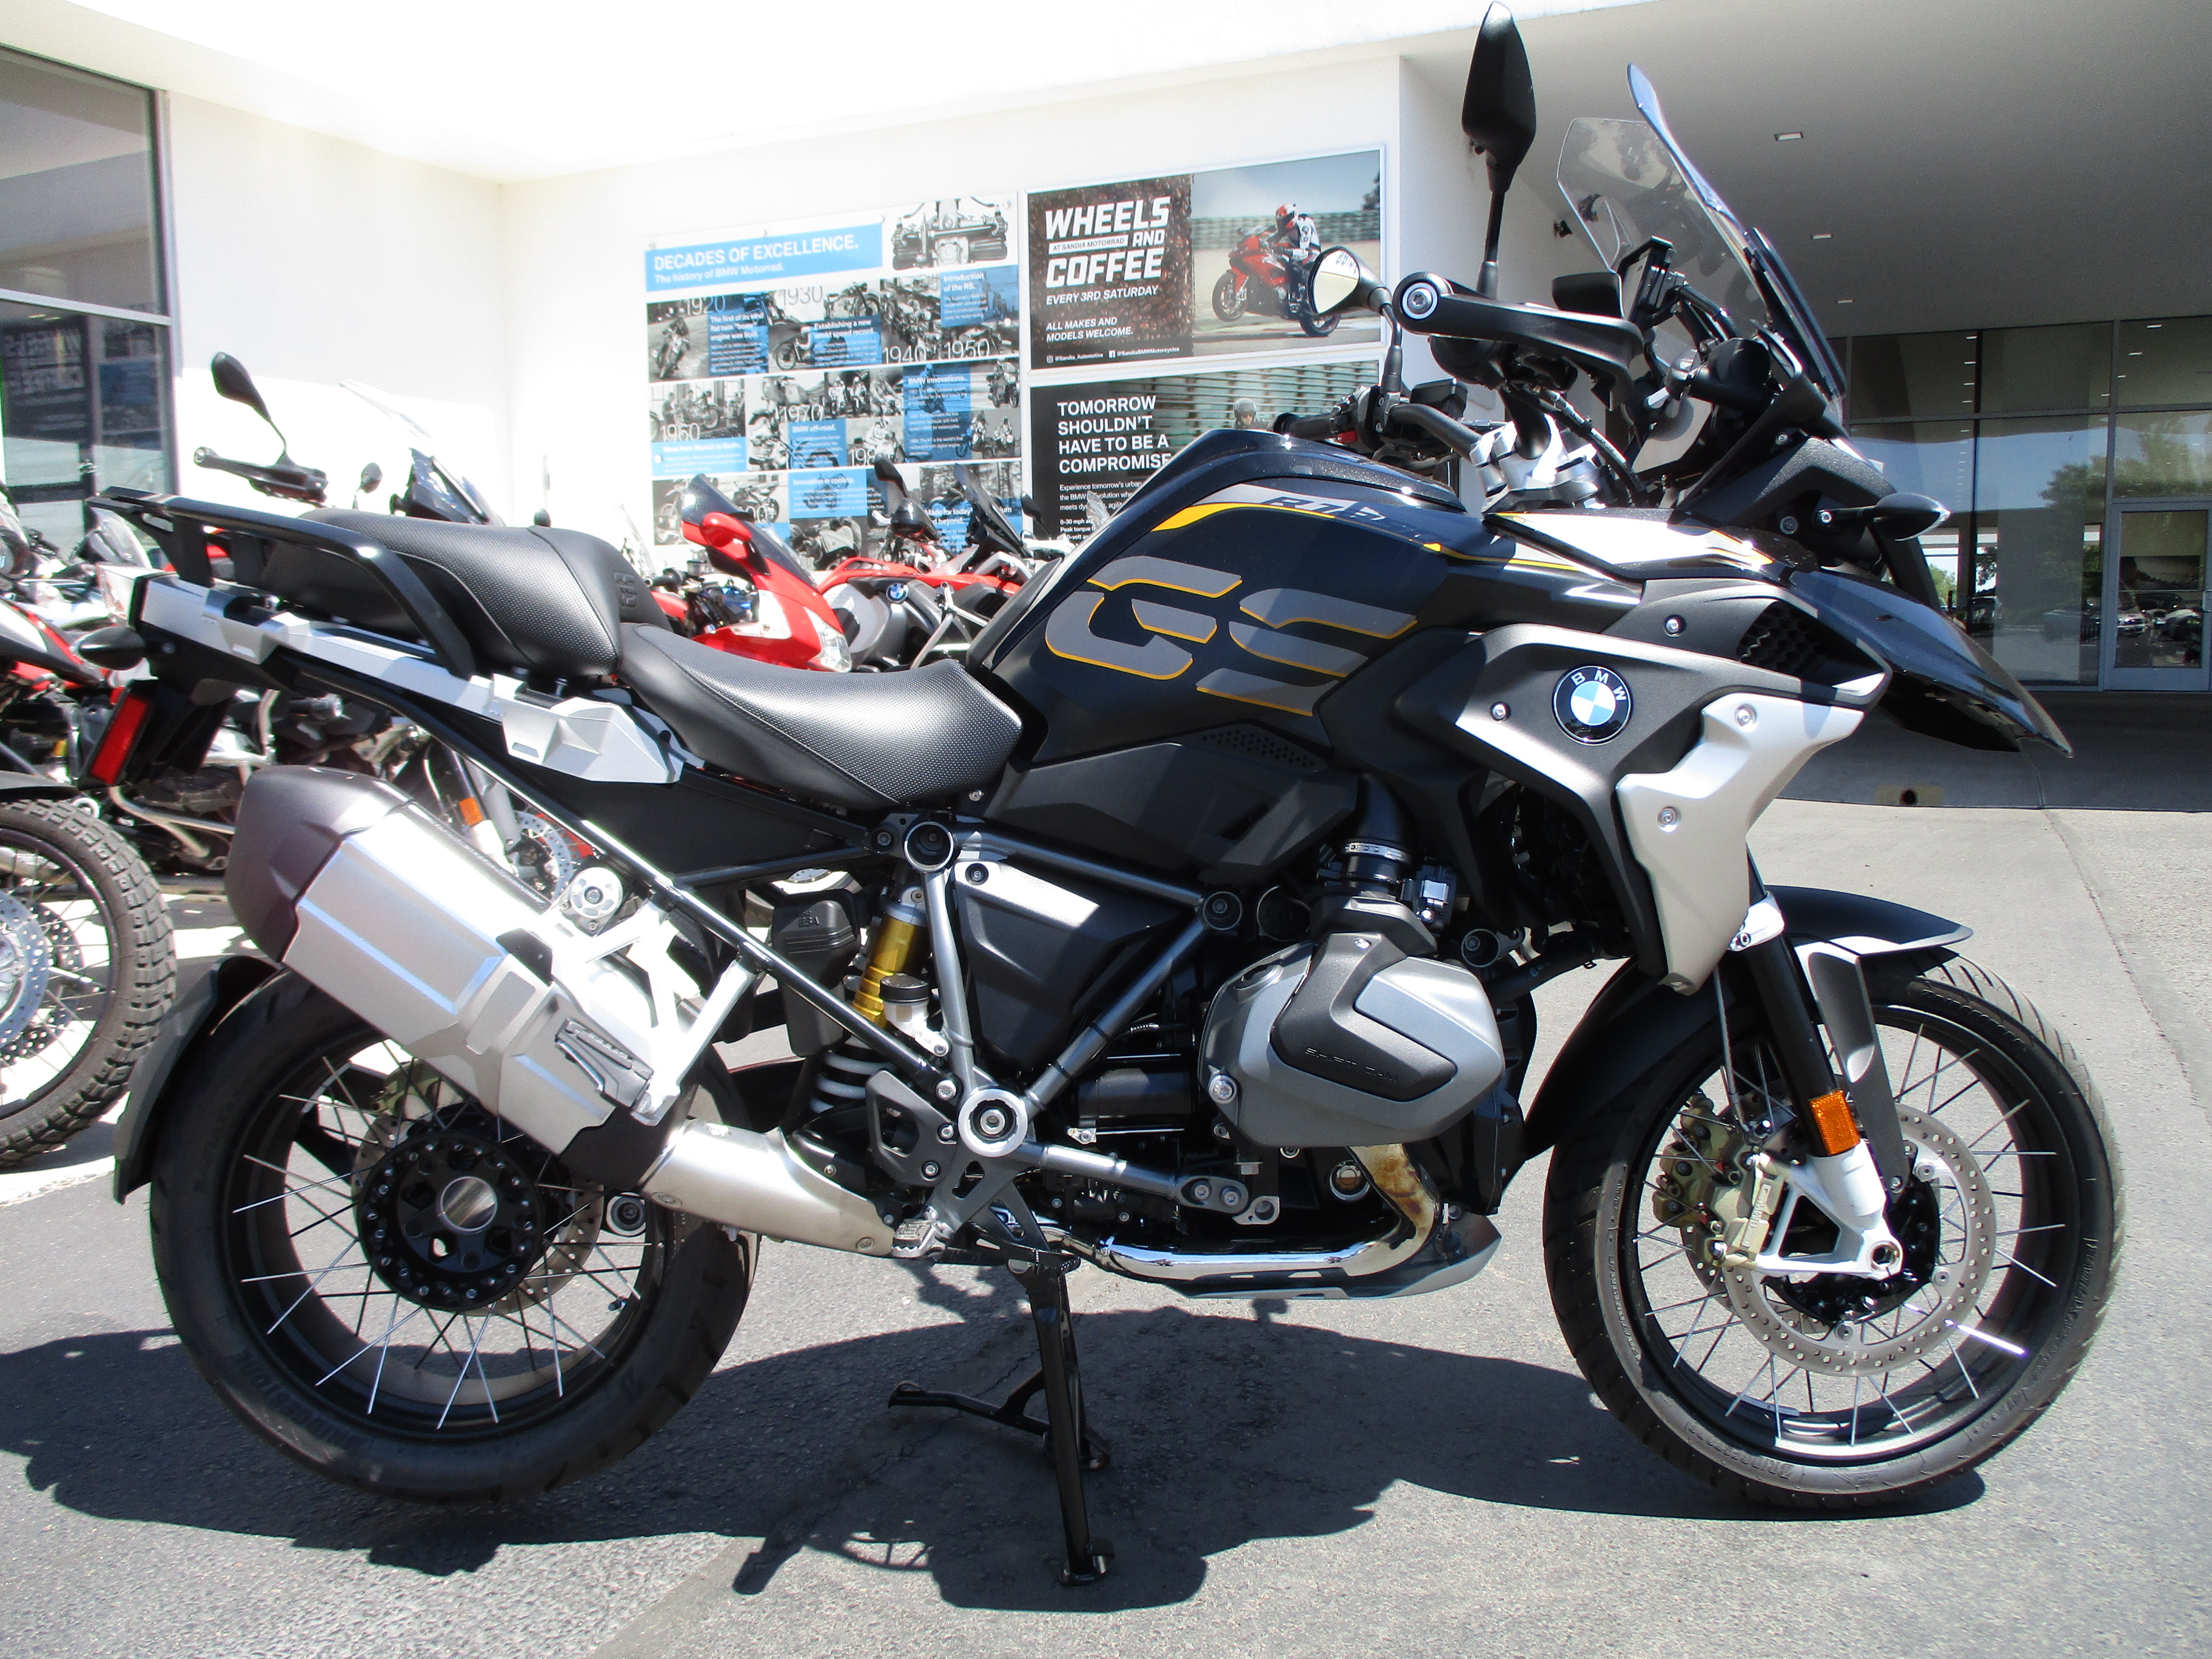 Pre-Owned Motorcycle Inventory - R1250GS - Sandia BMW Motorcycles